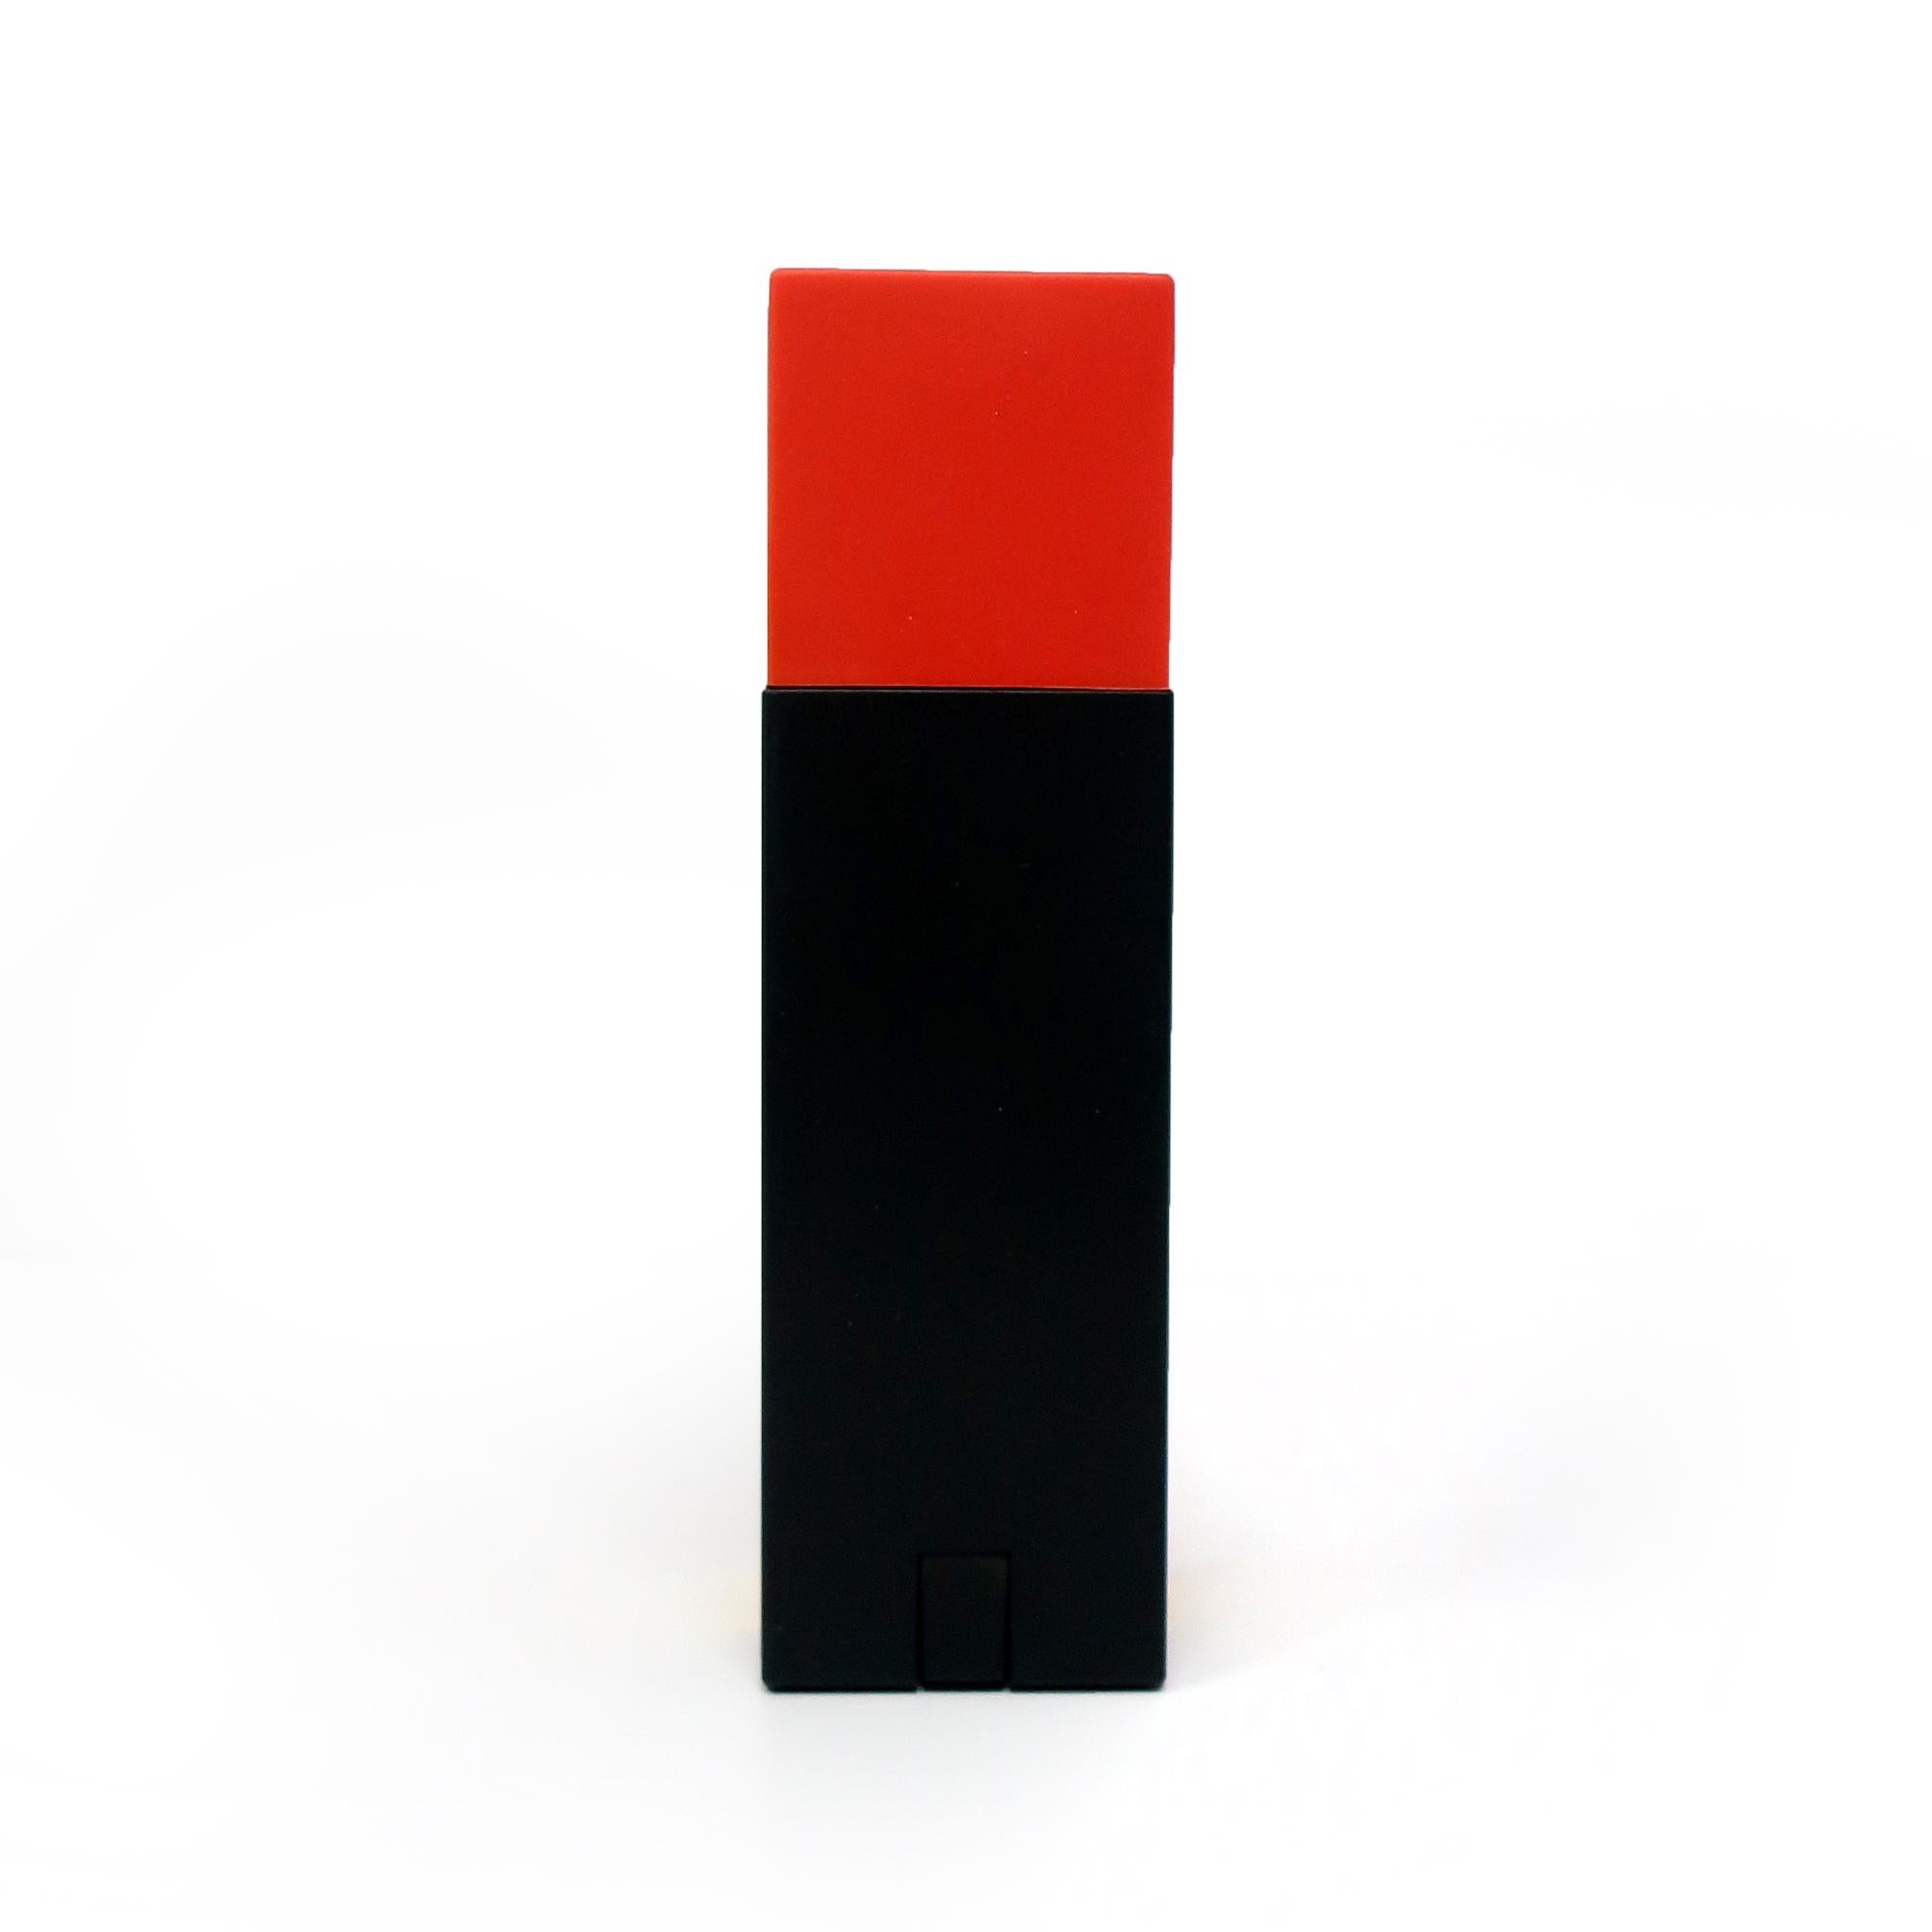 1986 Enorme Telephone Handset by Ettore Sottsass In Good Condition For Sale In Brooklyn, NY